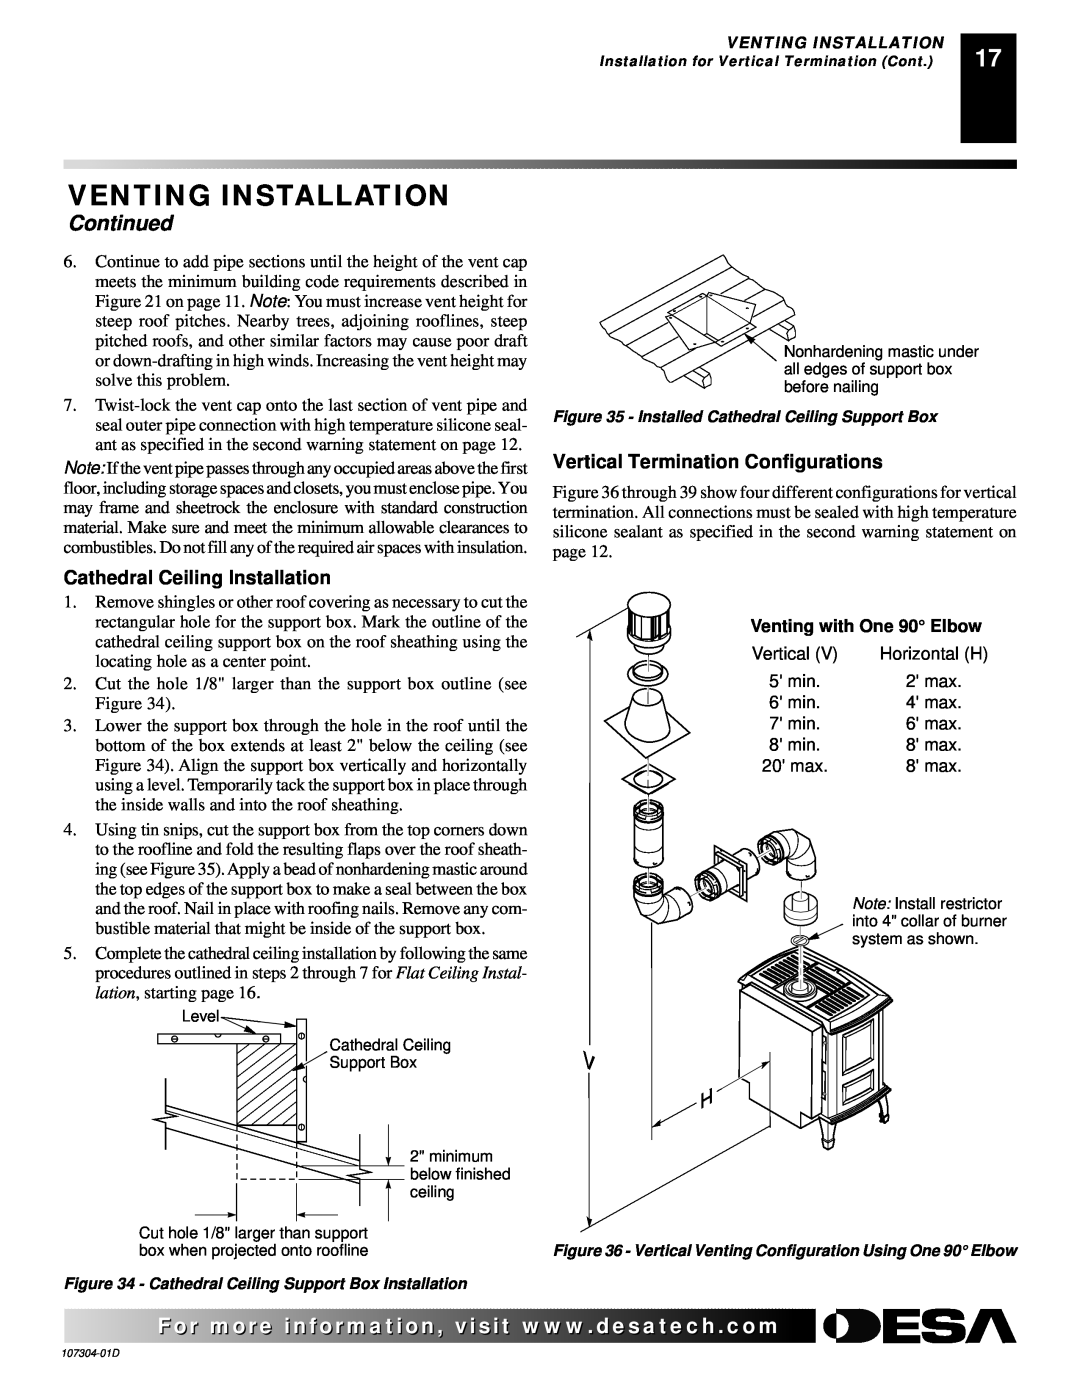 Desa SDVBNC, SDVBPC Venting Installation, Continued, Cathedral Ceiling Installation, Vertical Termination Configurations 